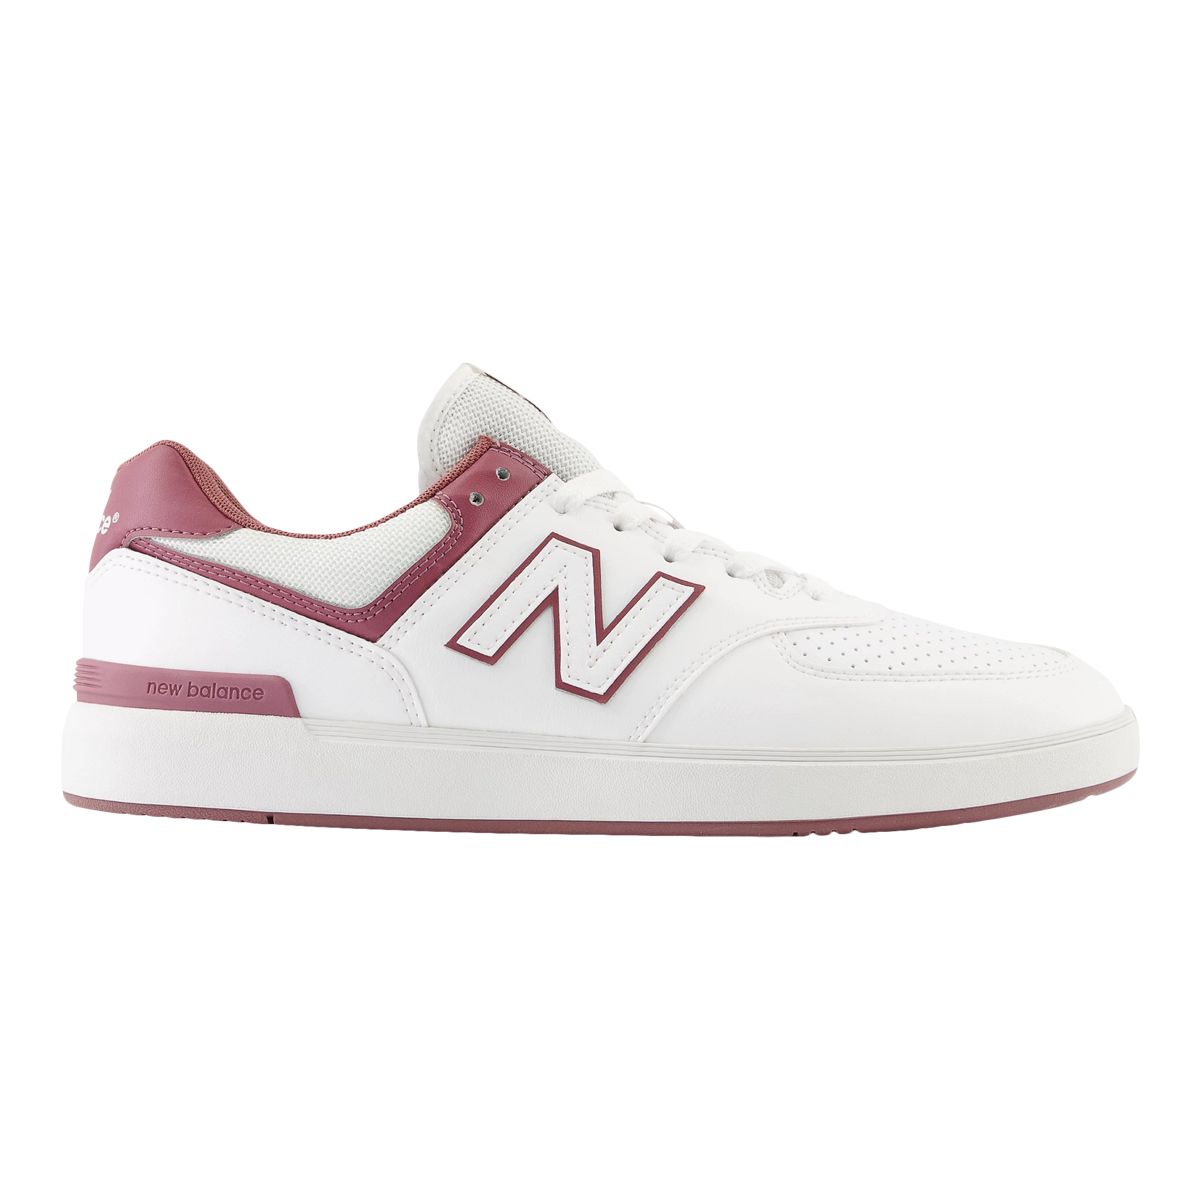 Image of New Balance Men's Ct574 Shoes